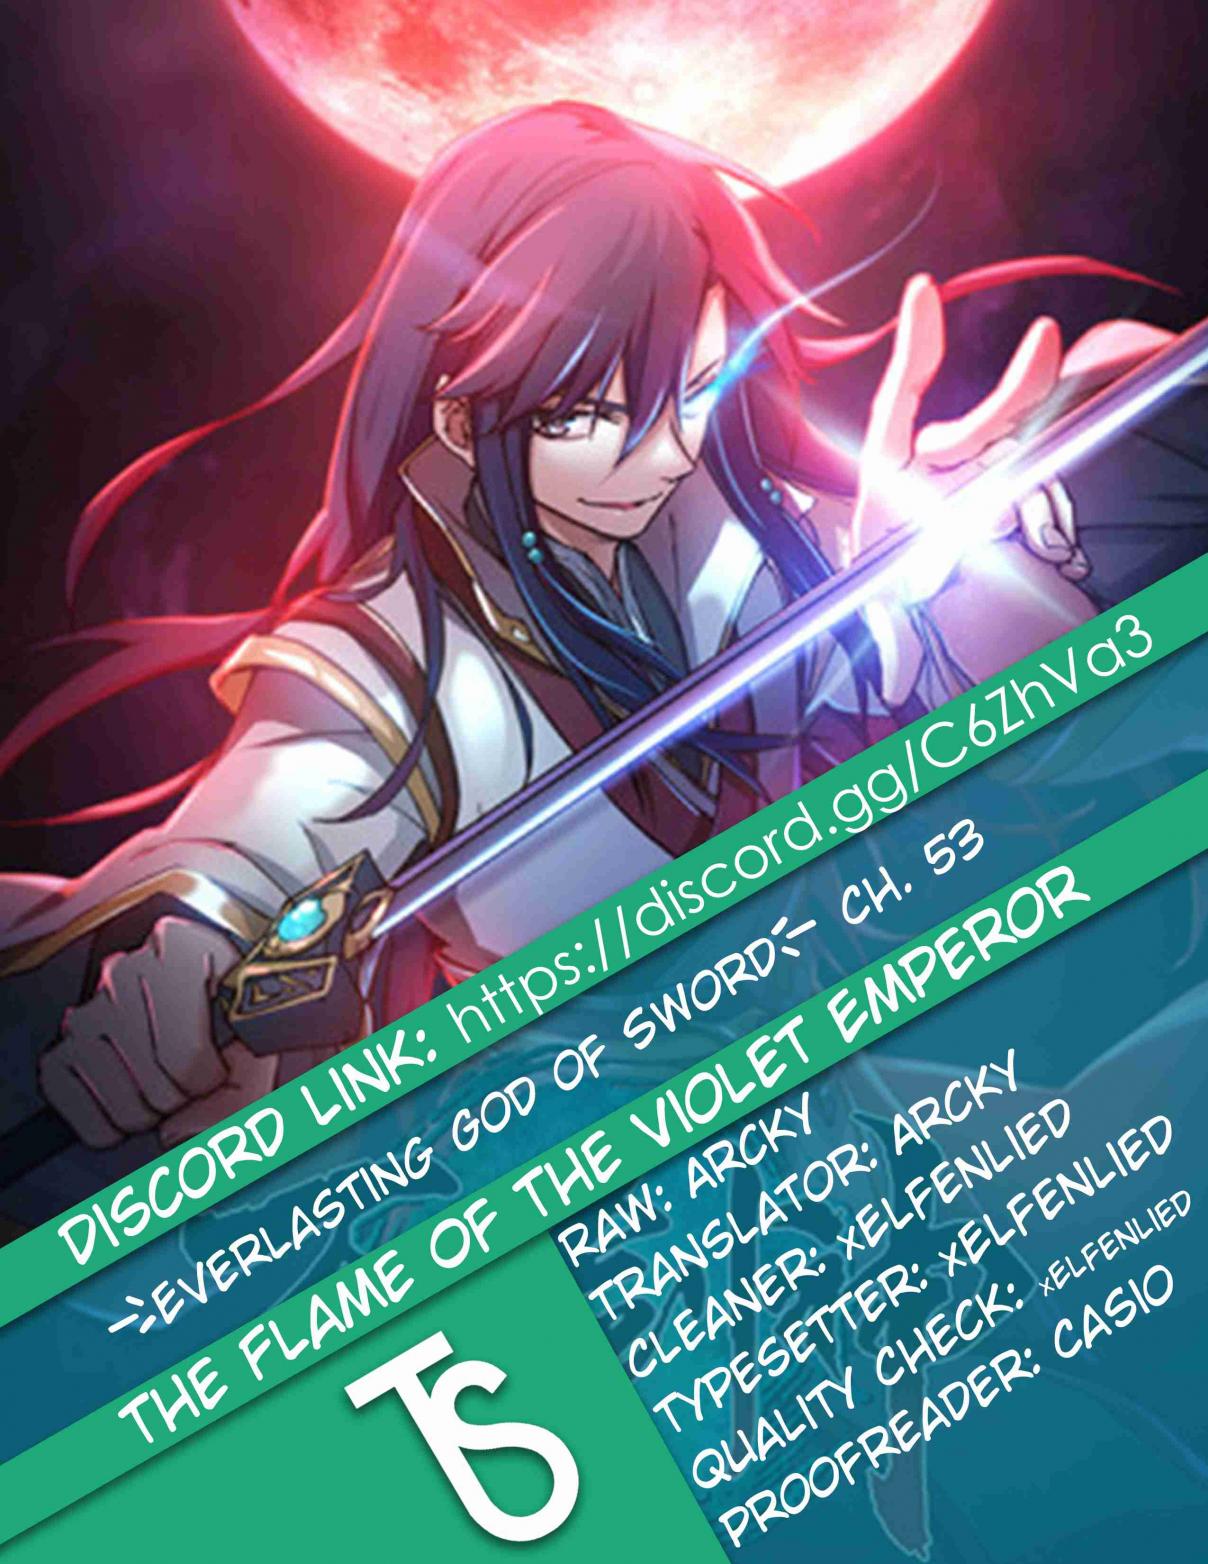 Everlasting God of Sword Ch. 53 The Flame Of The Violet Emperor